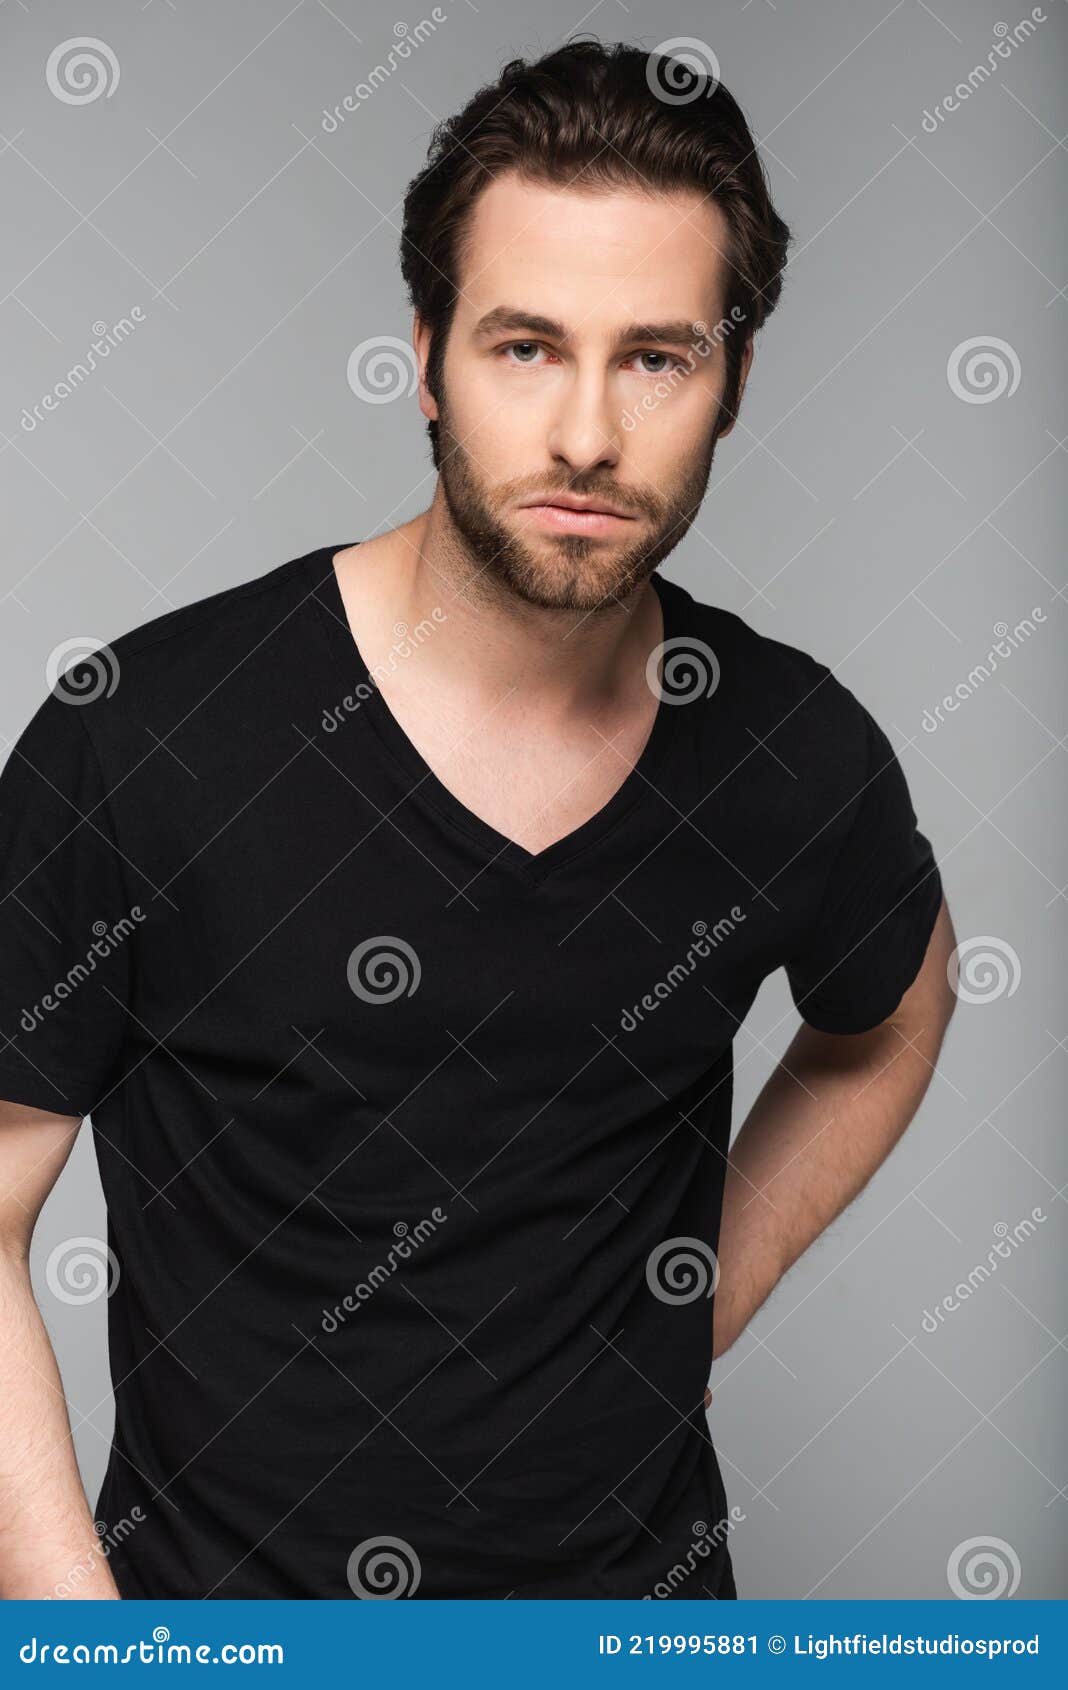 Good-looking Man in Black T Stock Image - Image of casual, face: 219995881